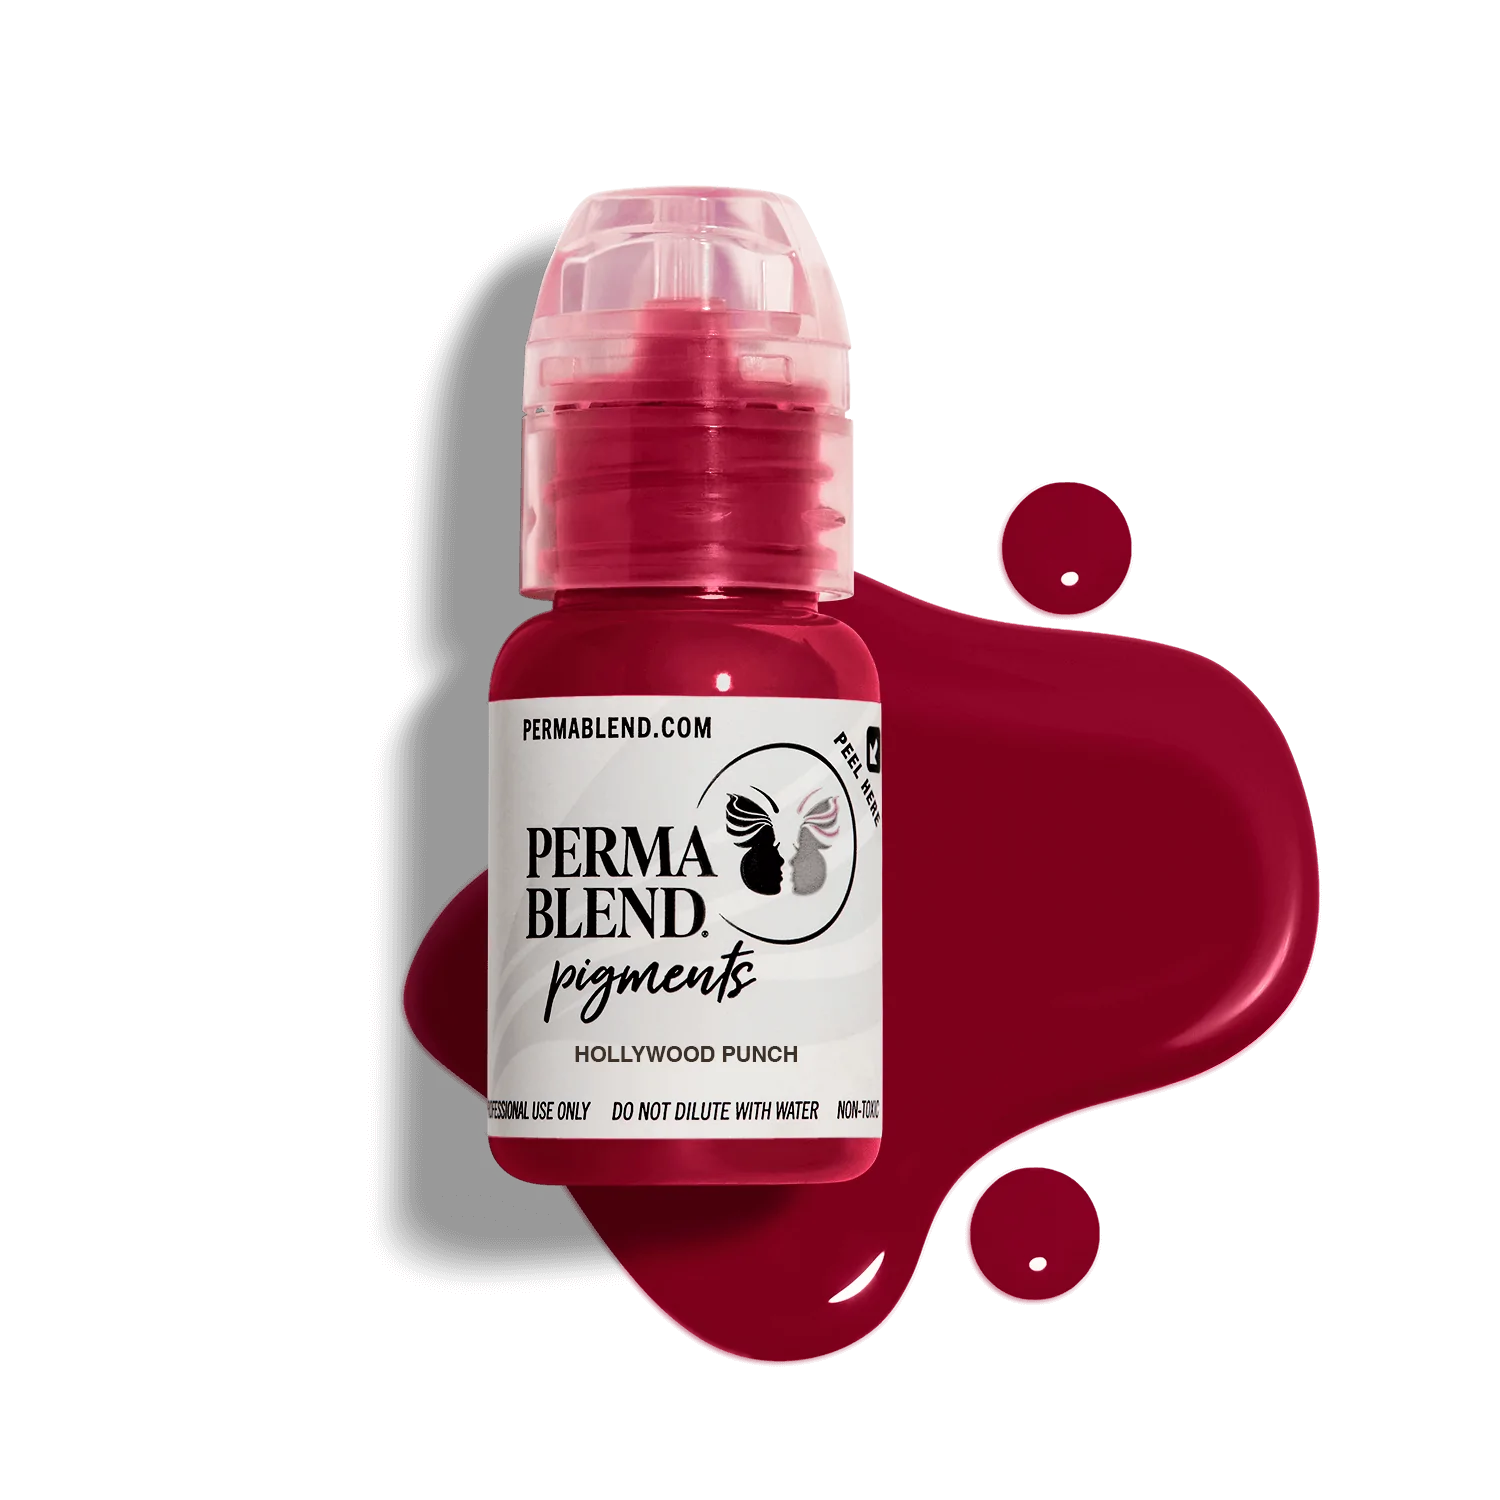 Perma Blend - Hollywood Punch 15ml